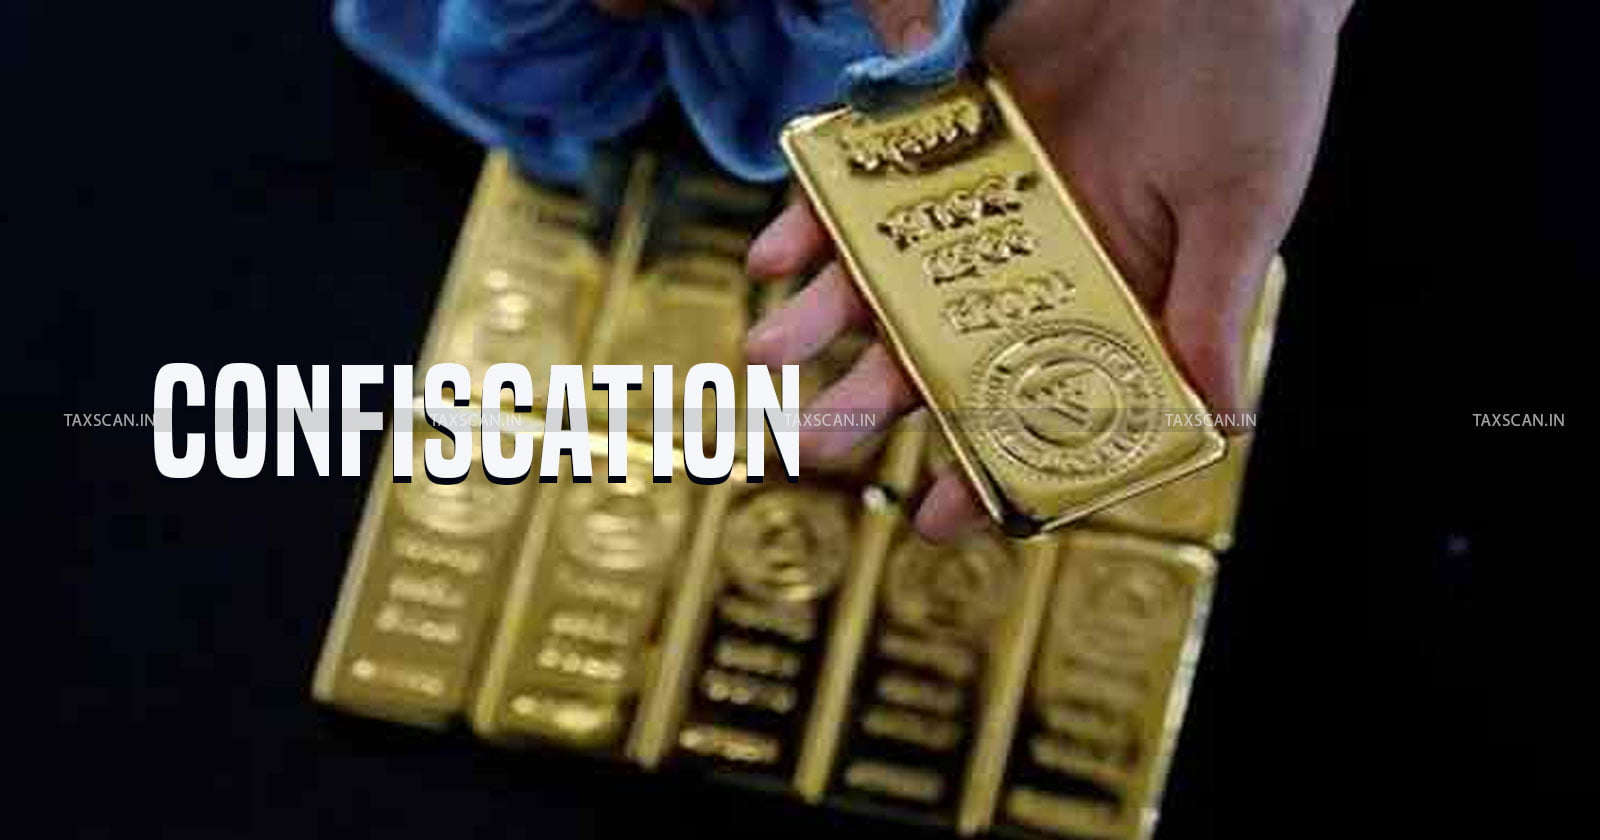 CESTAT - Upholds Penalty - Confiscation - Emirates Gold - Packing Machines - Illicit Smuggling - taxscan